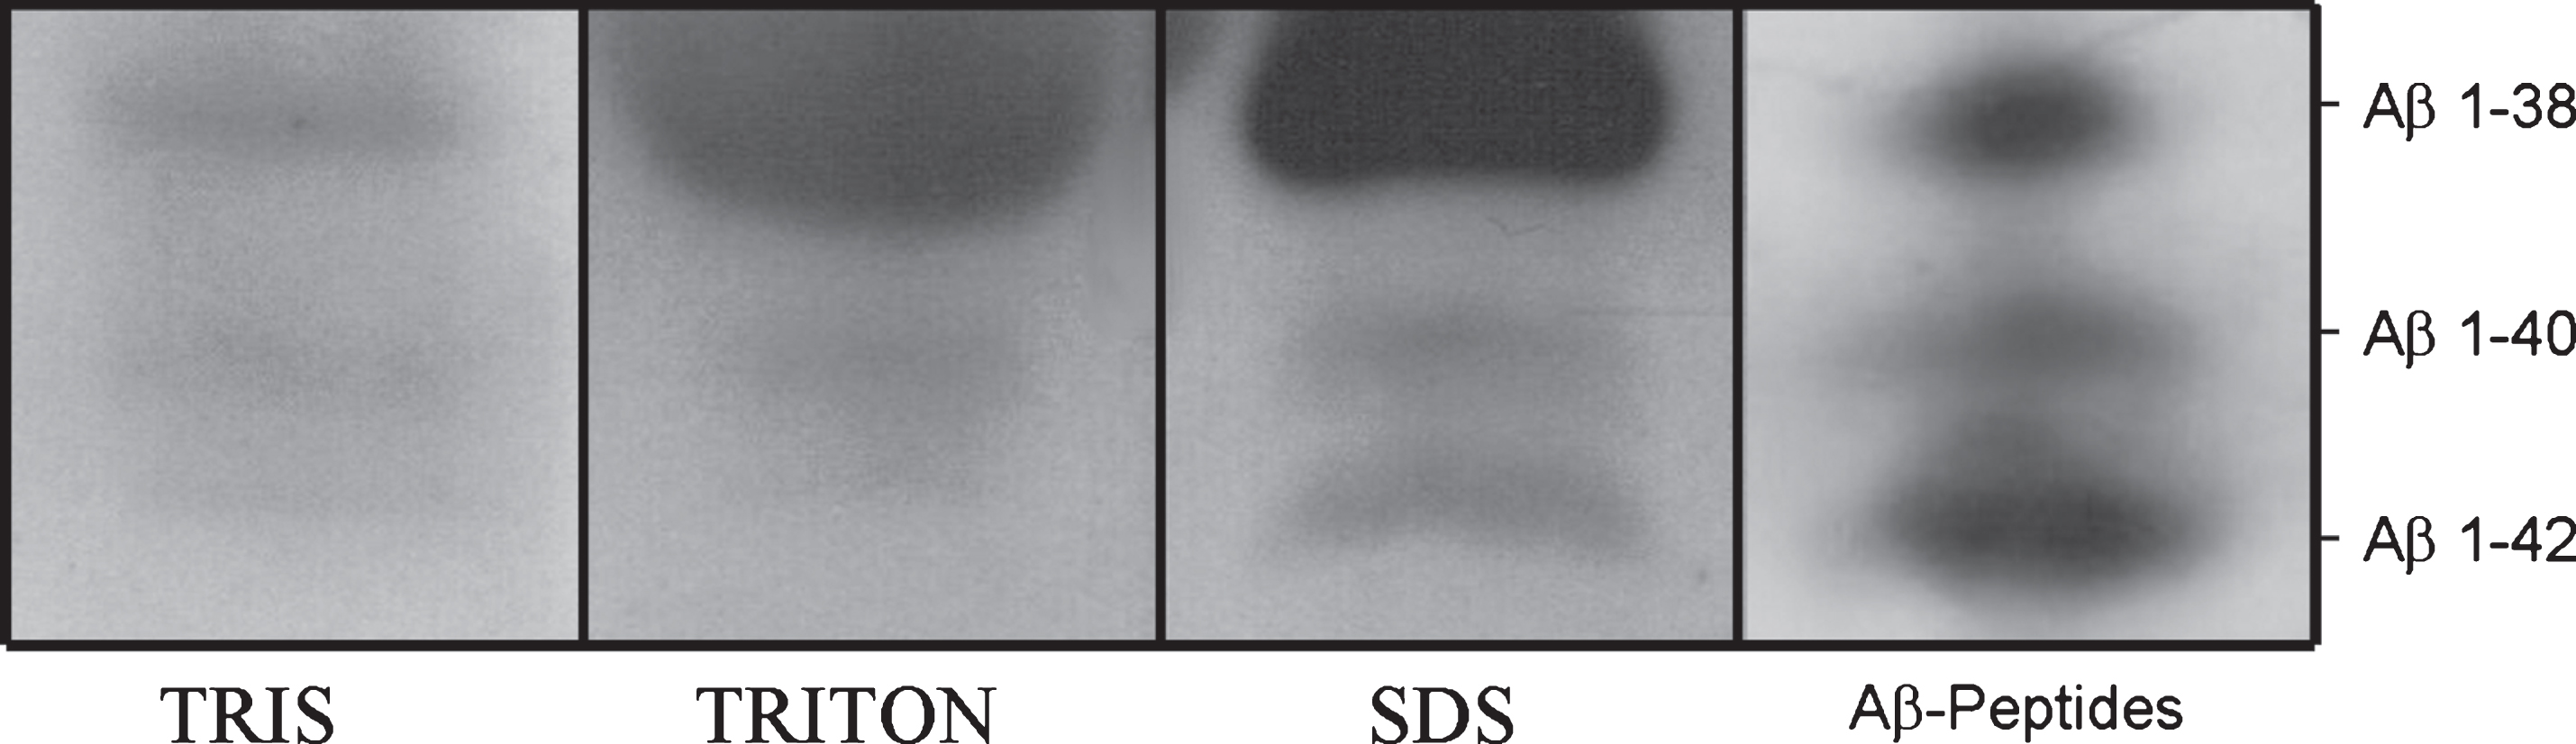 Western blot analysis of Aβ using 6E10 antibody. Aβ peptides 1–38, 1–40, and 1–42 in Tris, Triton, and SDS fractions of cattle cortex pools. Synthetic Aβ peptides were used as controls.